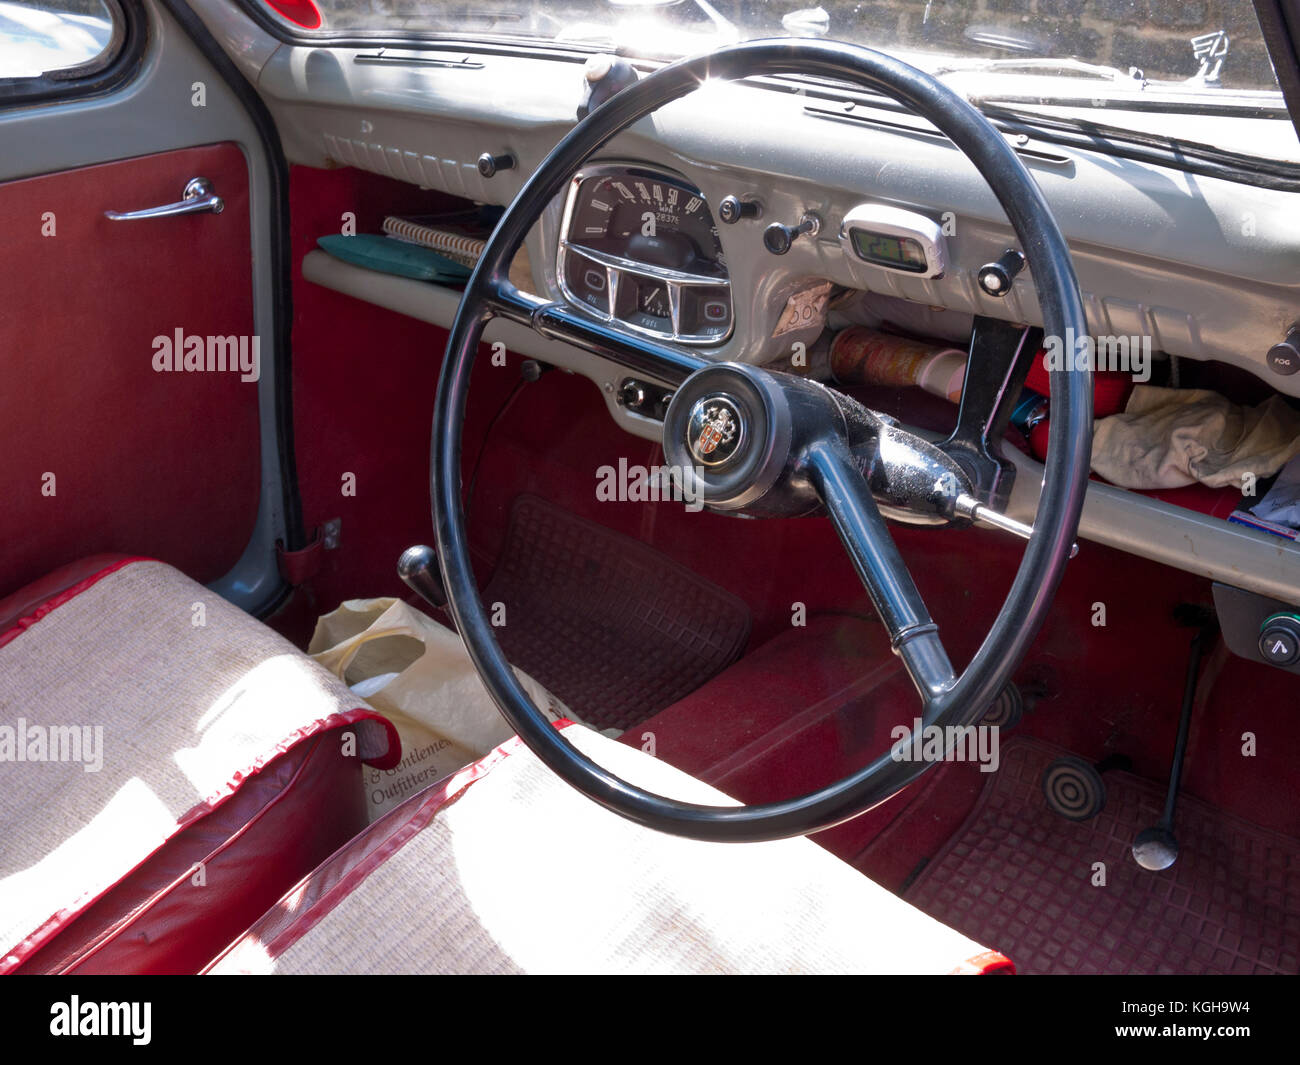 Interior shot of the driver cockpit in an Austin A35 vintage car showing two spoke steering wheel and speedometer panel, with red trim interior Stock Photo